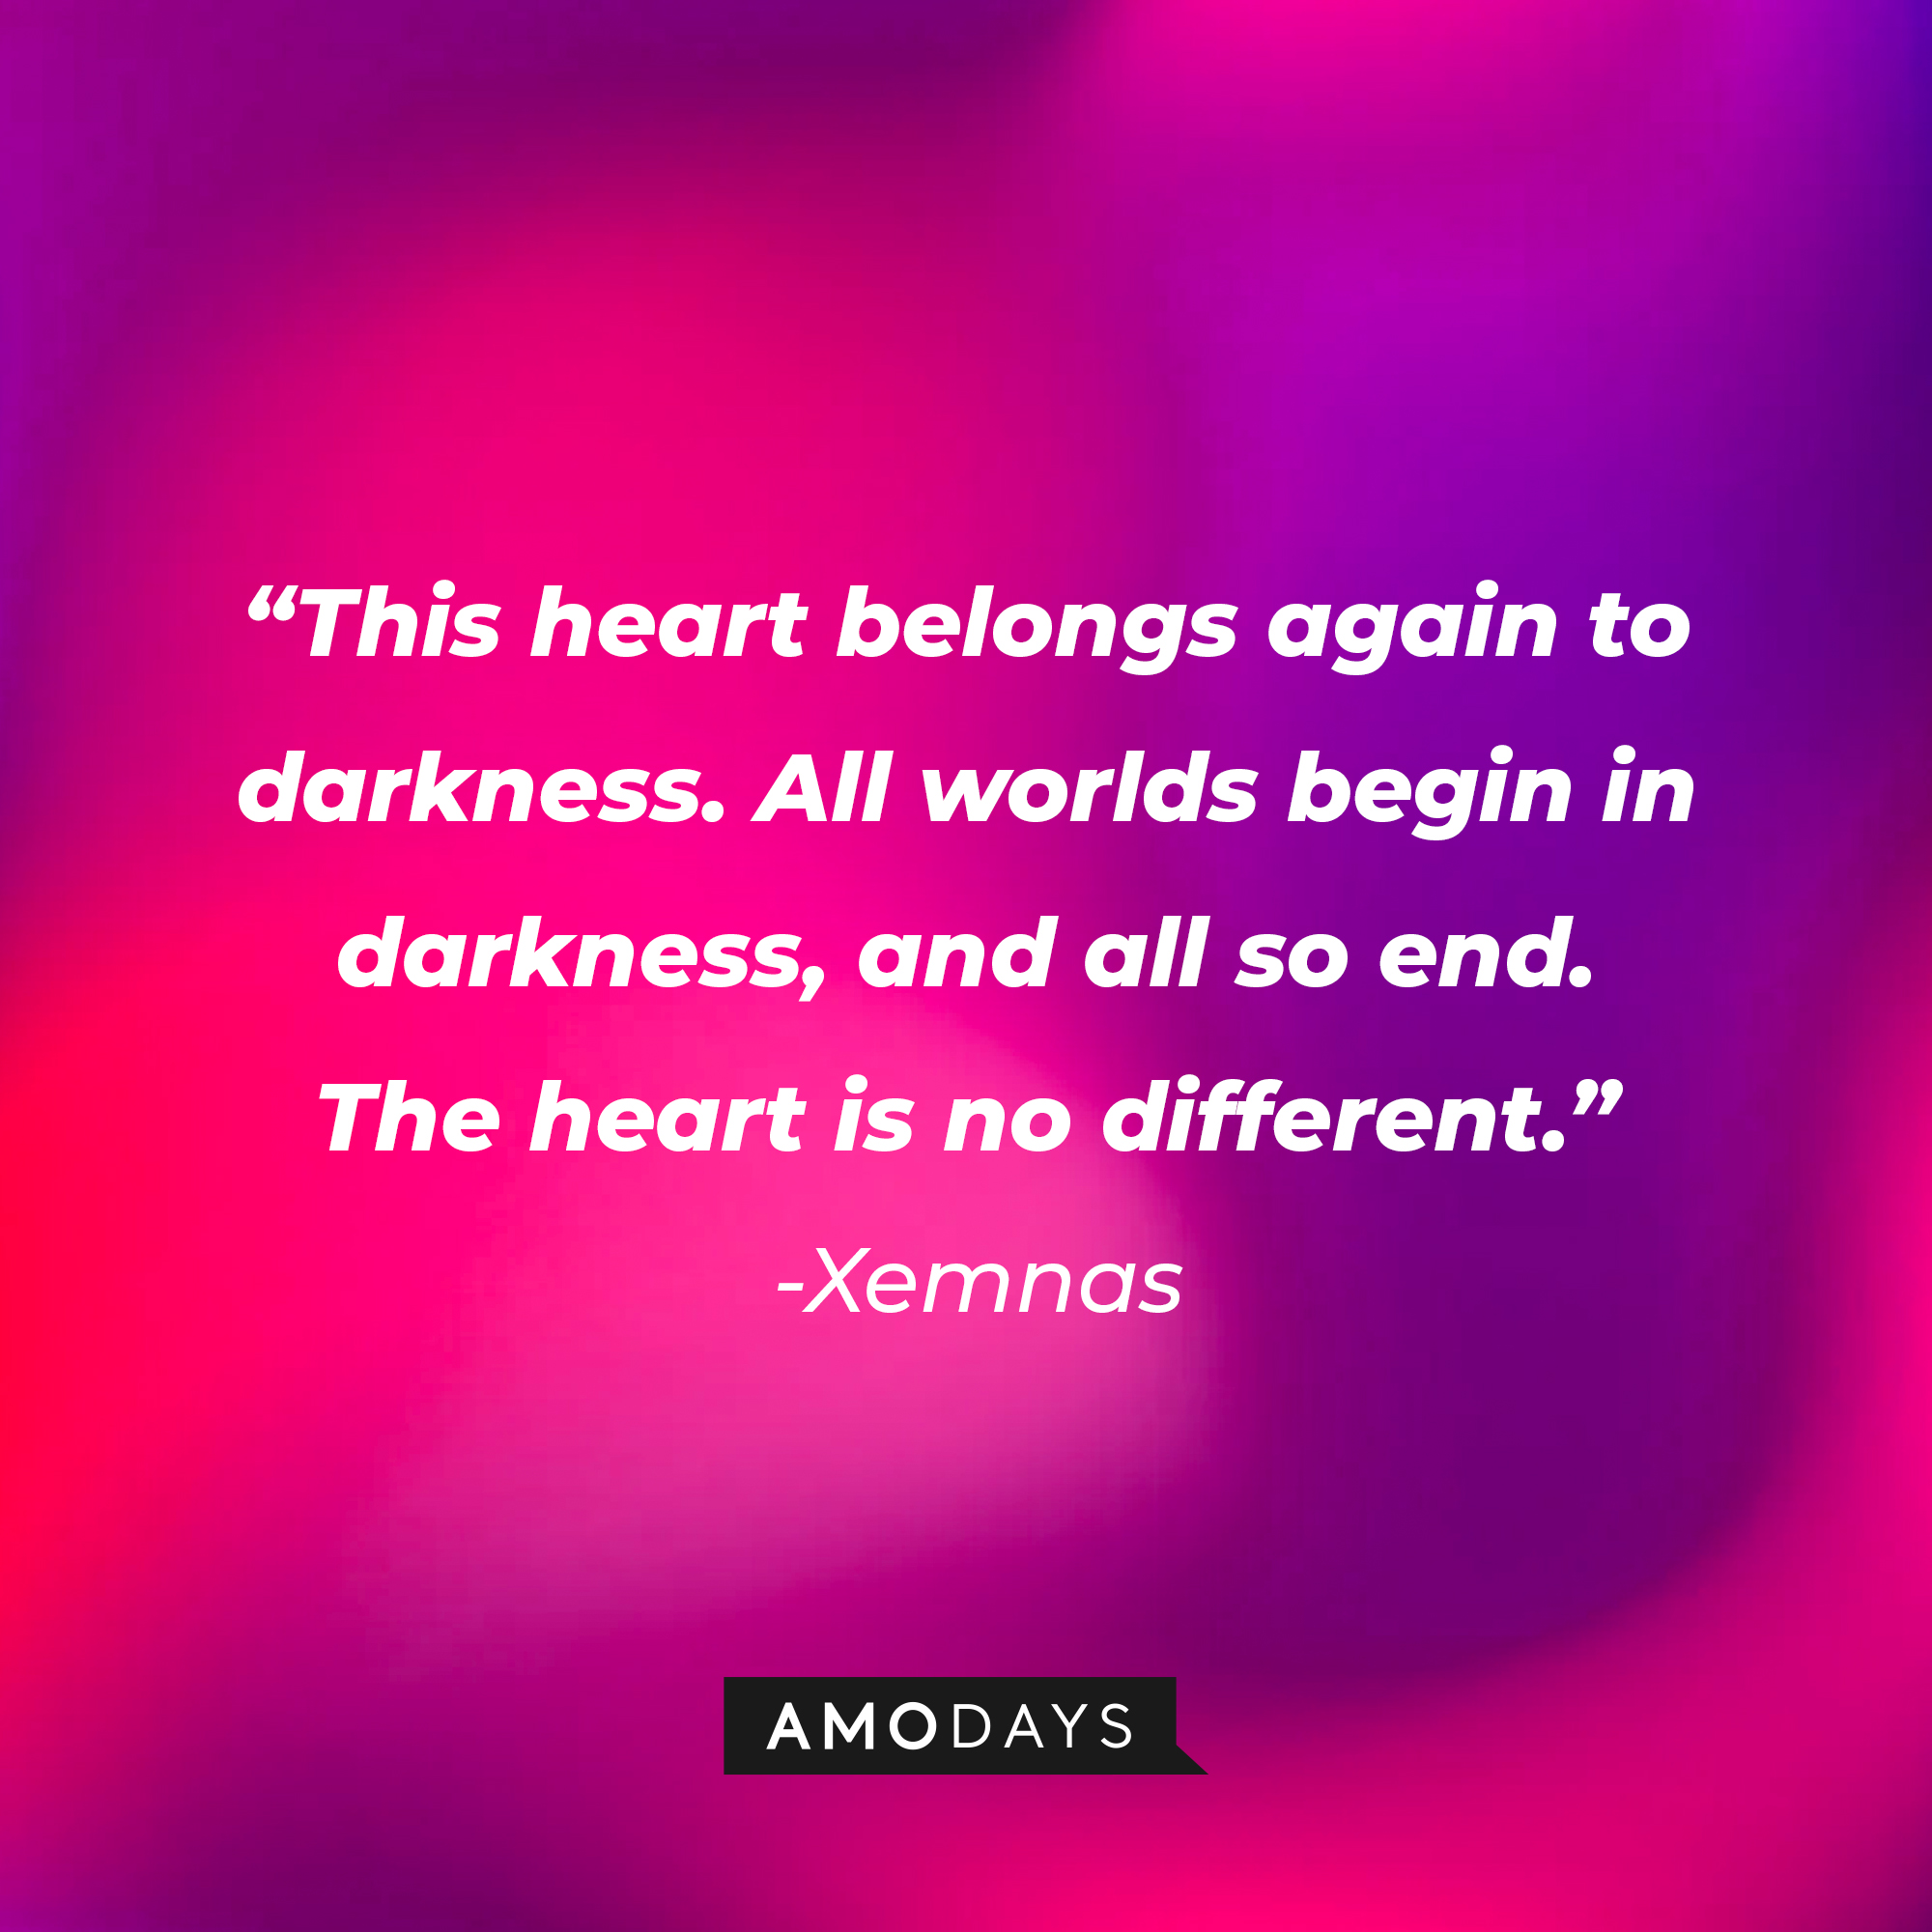 Xenmas’ quote: “This heart belongs again to darkness. All worlds begin in darkness, and all so end. The heart is no different.” | Source: AmoDays